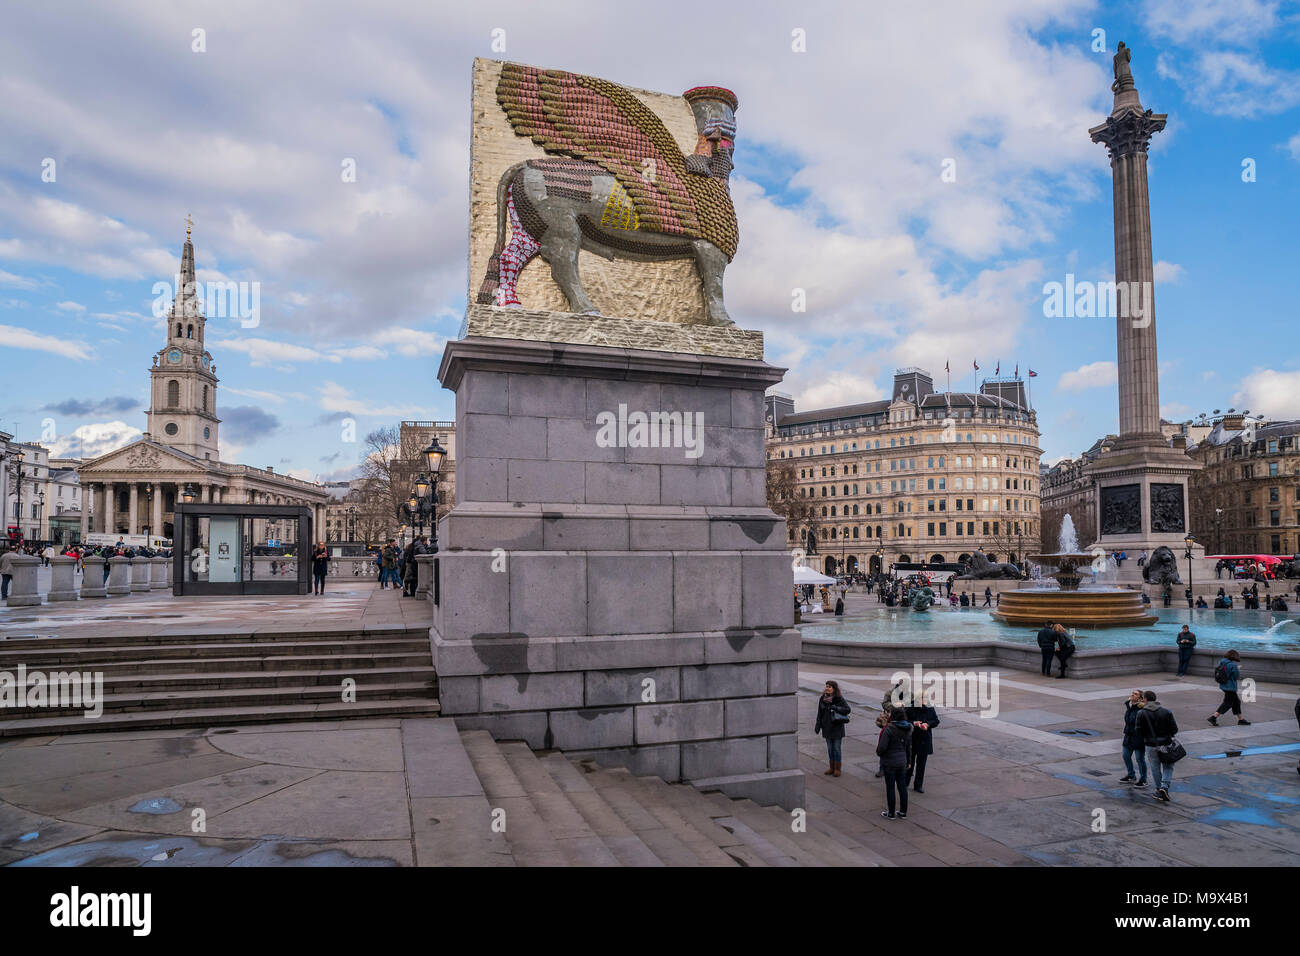 London, UK. 28th March, 2018. The Invisible Enemy Should Not Exist, the latest artwork for the fourth plinth at Trafalgar Square, by Artist Michael Rakowitz. It is designed as a tribute to “something good in the human spirit” and as a recreation of a statue destroyed by ISIS in 2015. The sculpture, which shows a mythical winged beast called a Lamassu, is 4.5 metres high, took four months to build and is made up of 10,500 empty Iraqi date syrup cans symbolising one of the country’s former thriving industries shattered by war. Credit: Guy Bell/Alamy Live News Stock Photo